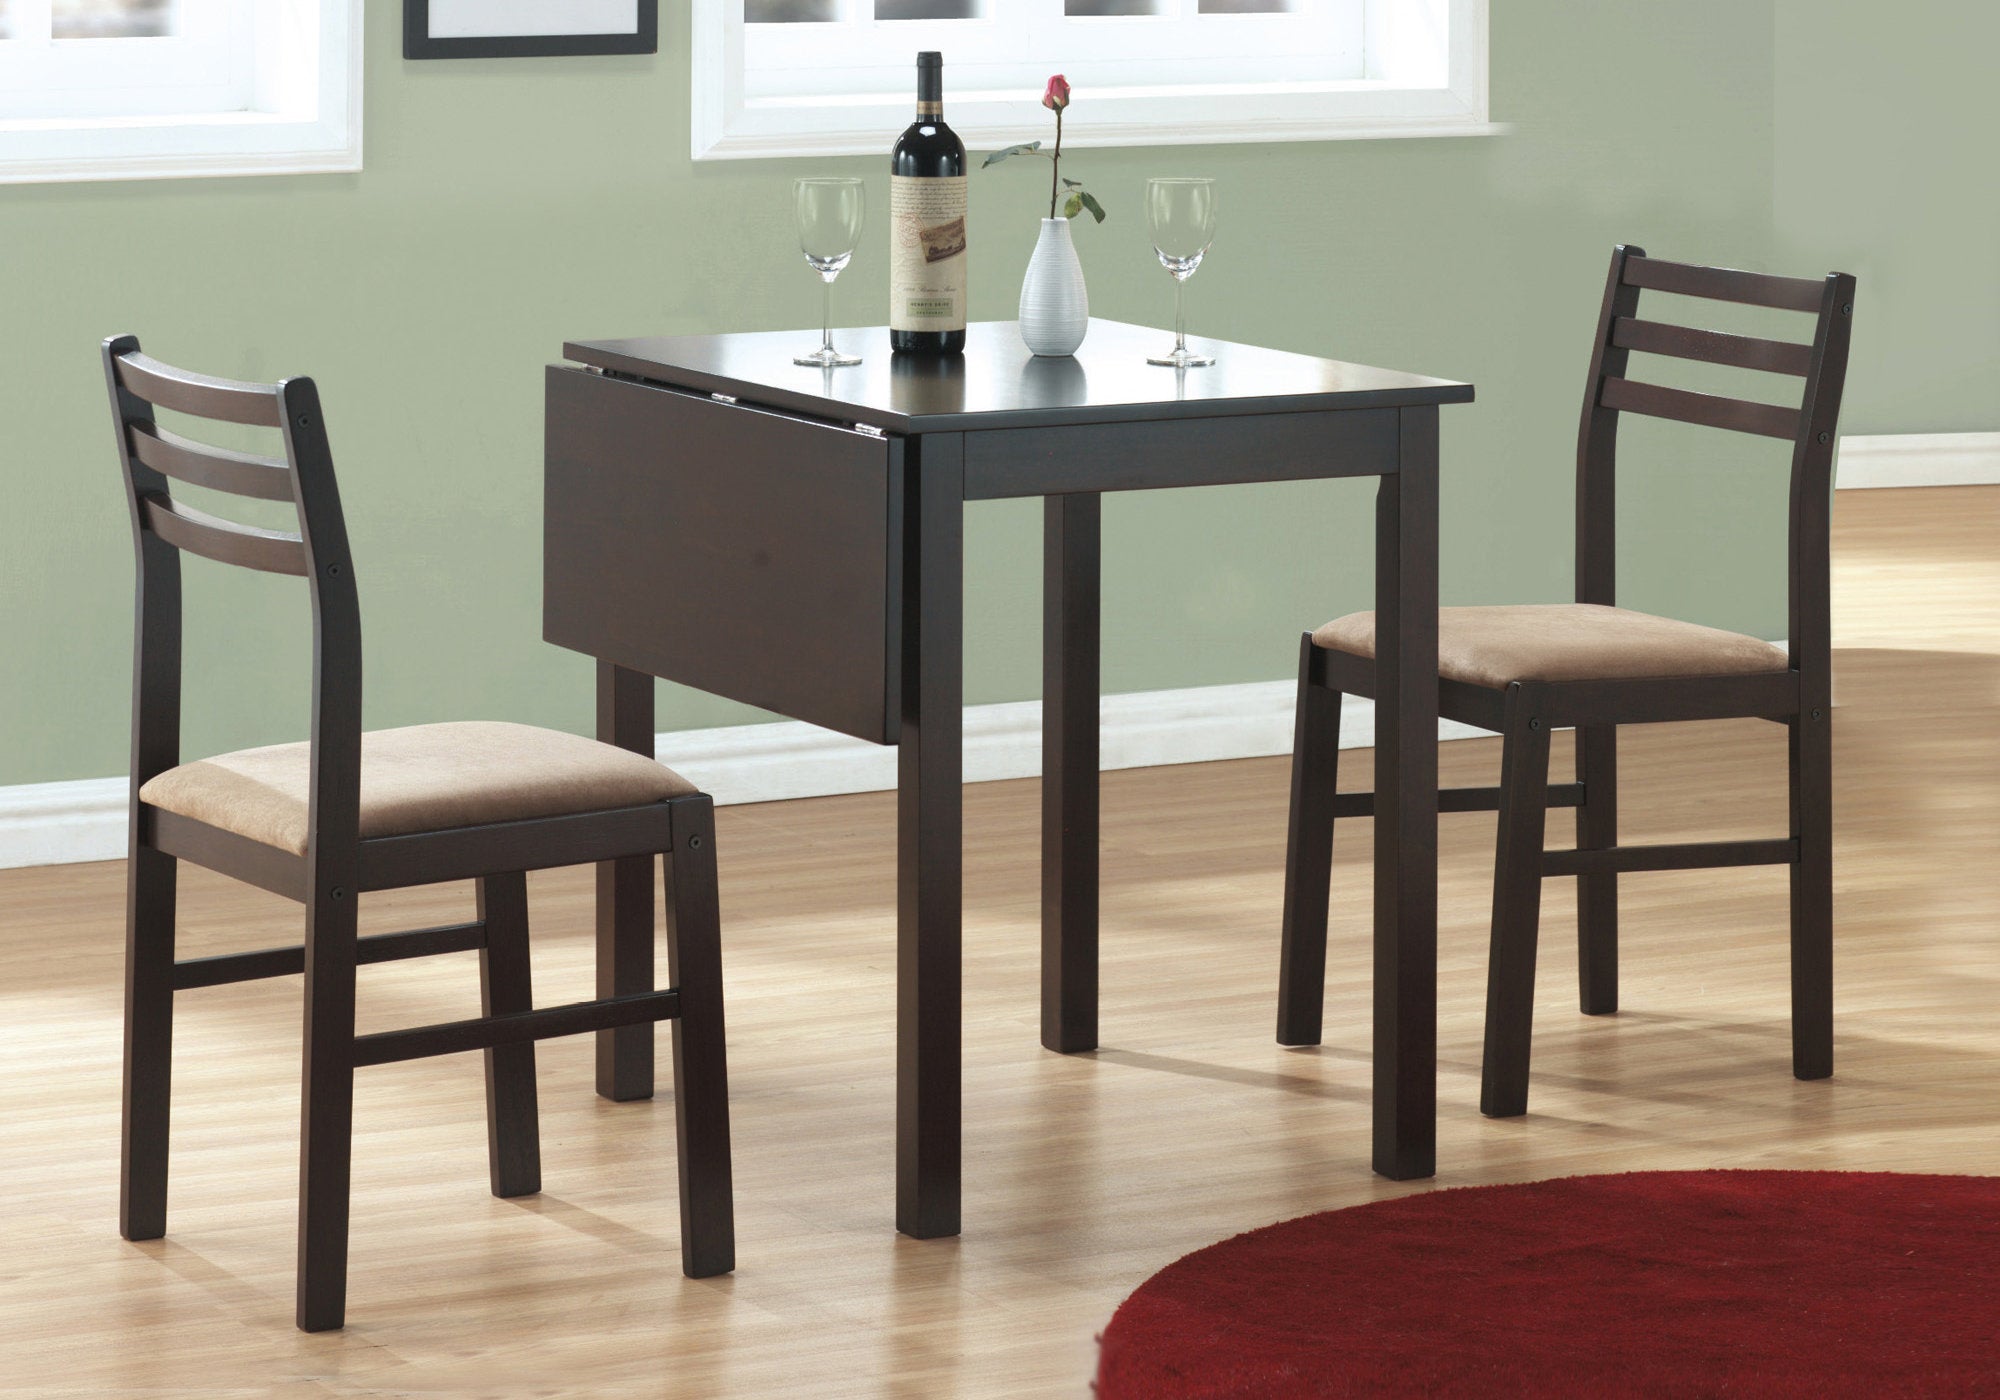 Valner Wooden Drop Leaf Dining Table With 2 Chairs (Espresso - 3 Pcs Set)